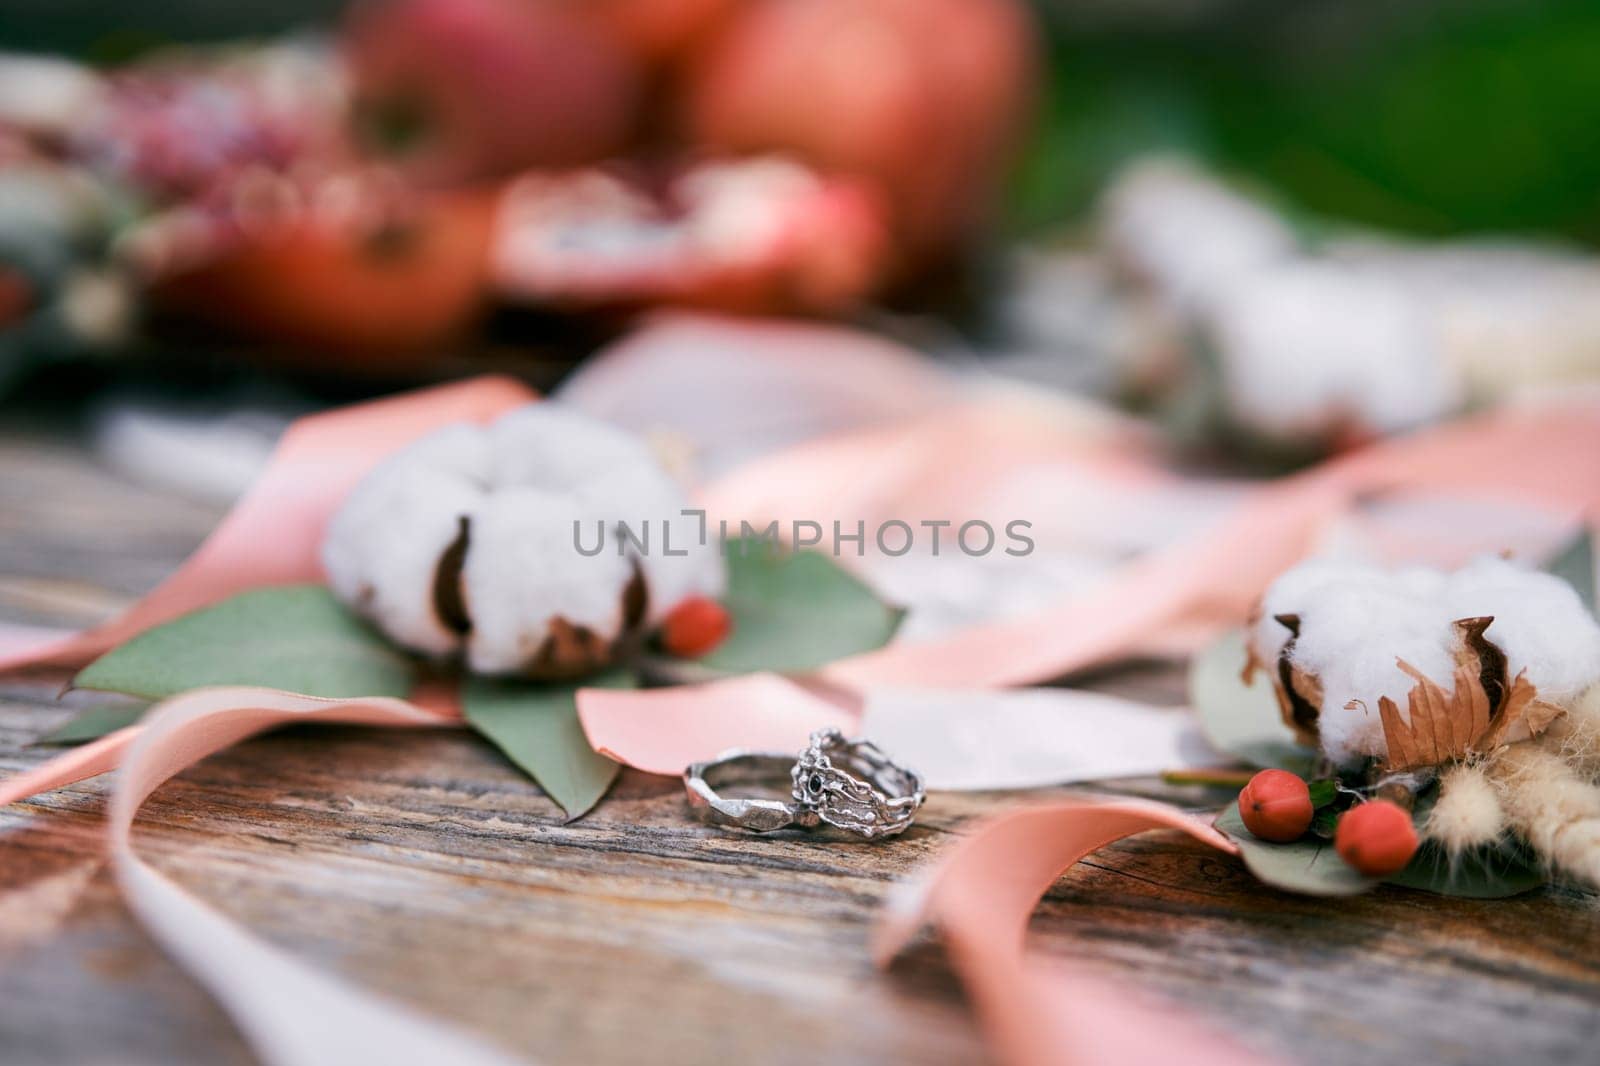 Wedding rings lie on a wooden table near ribbons and cotton flowers by Nadtochiy